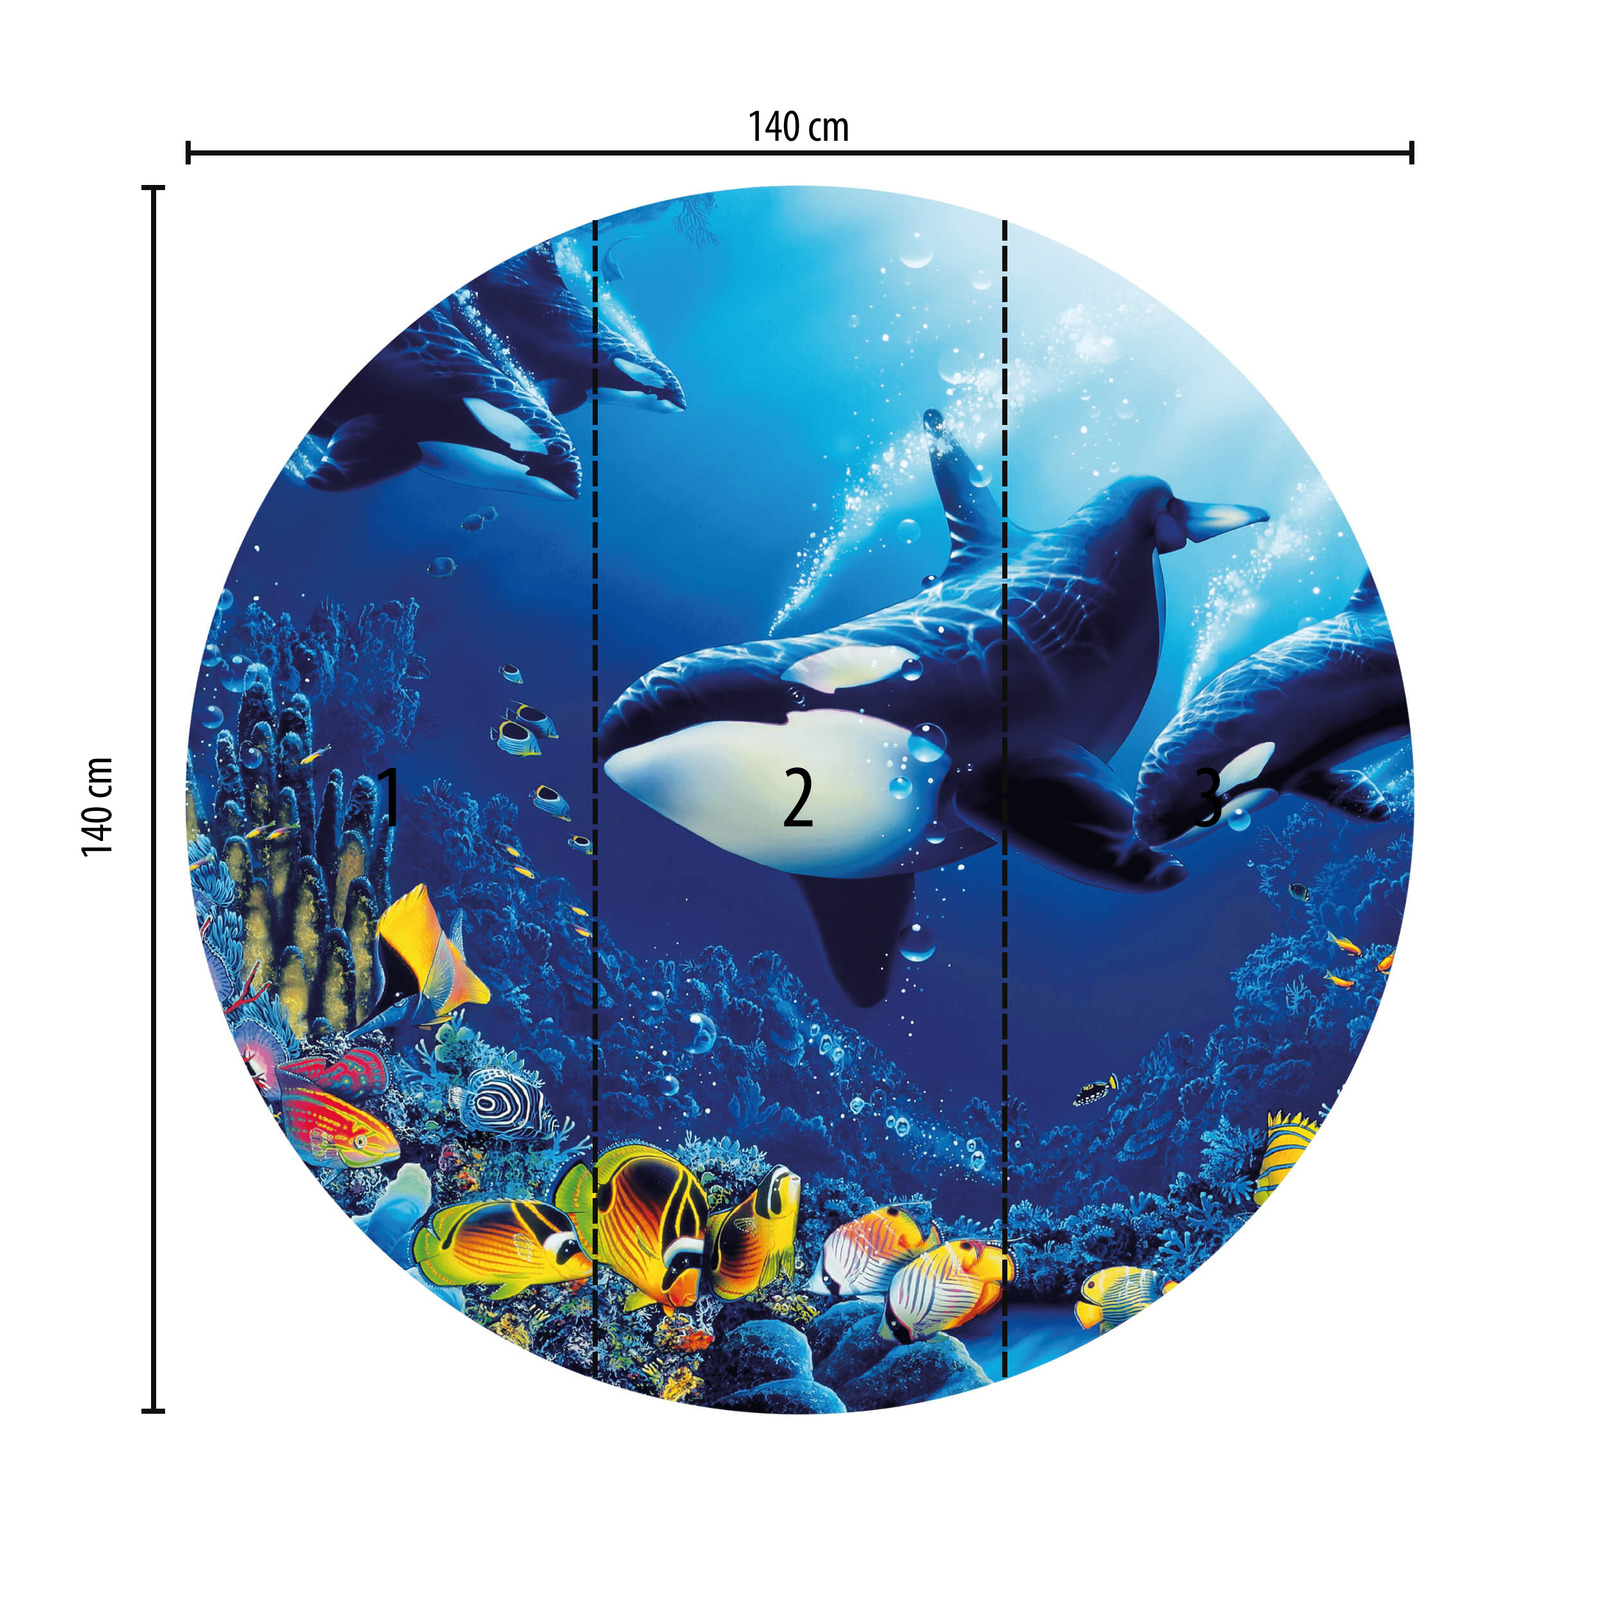             Round mural with underwater world and whales
        